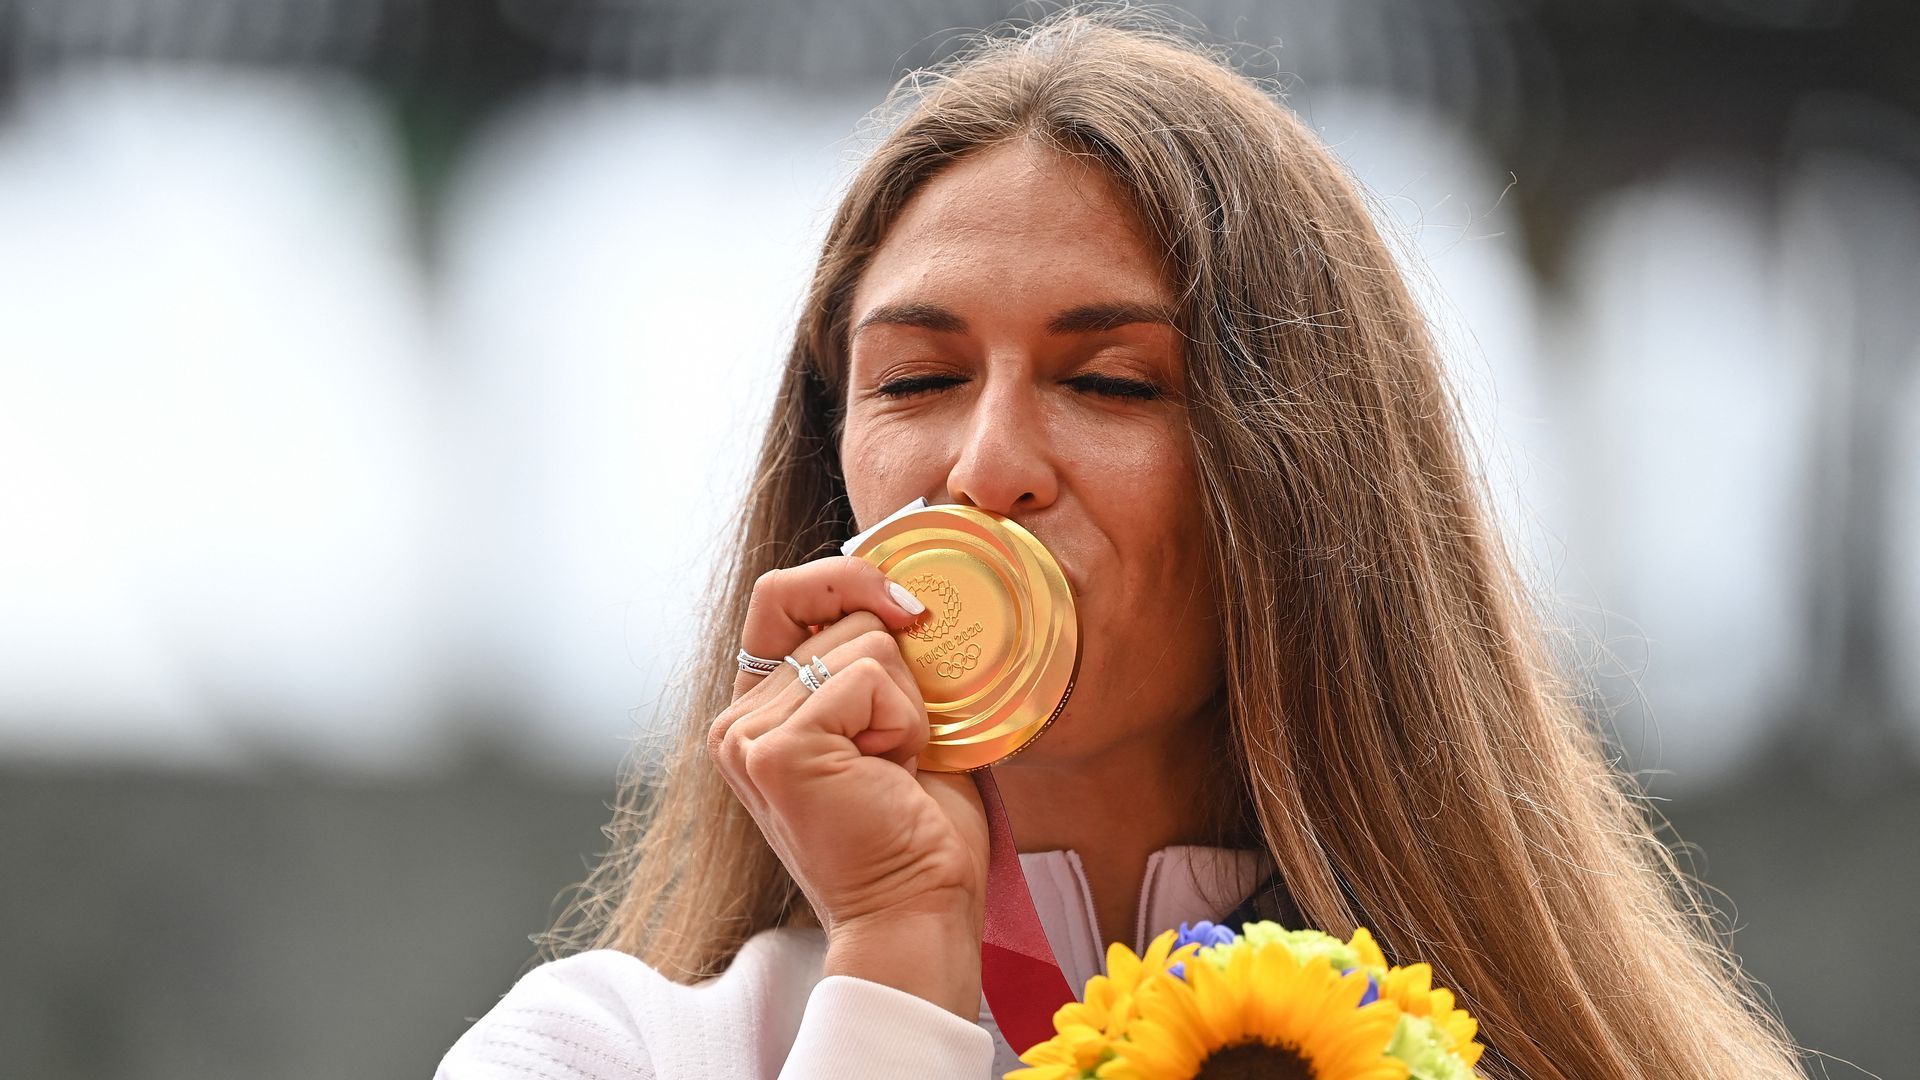 American Valarie Allman celebrates on the podium with her gold medal after winning the women's discus throw event at the Olympic Stadium in Tokyo on Aug. 3.